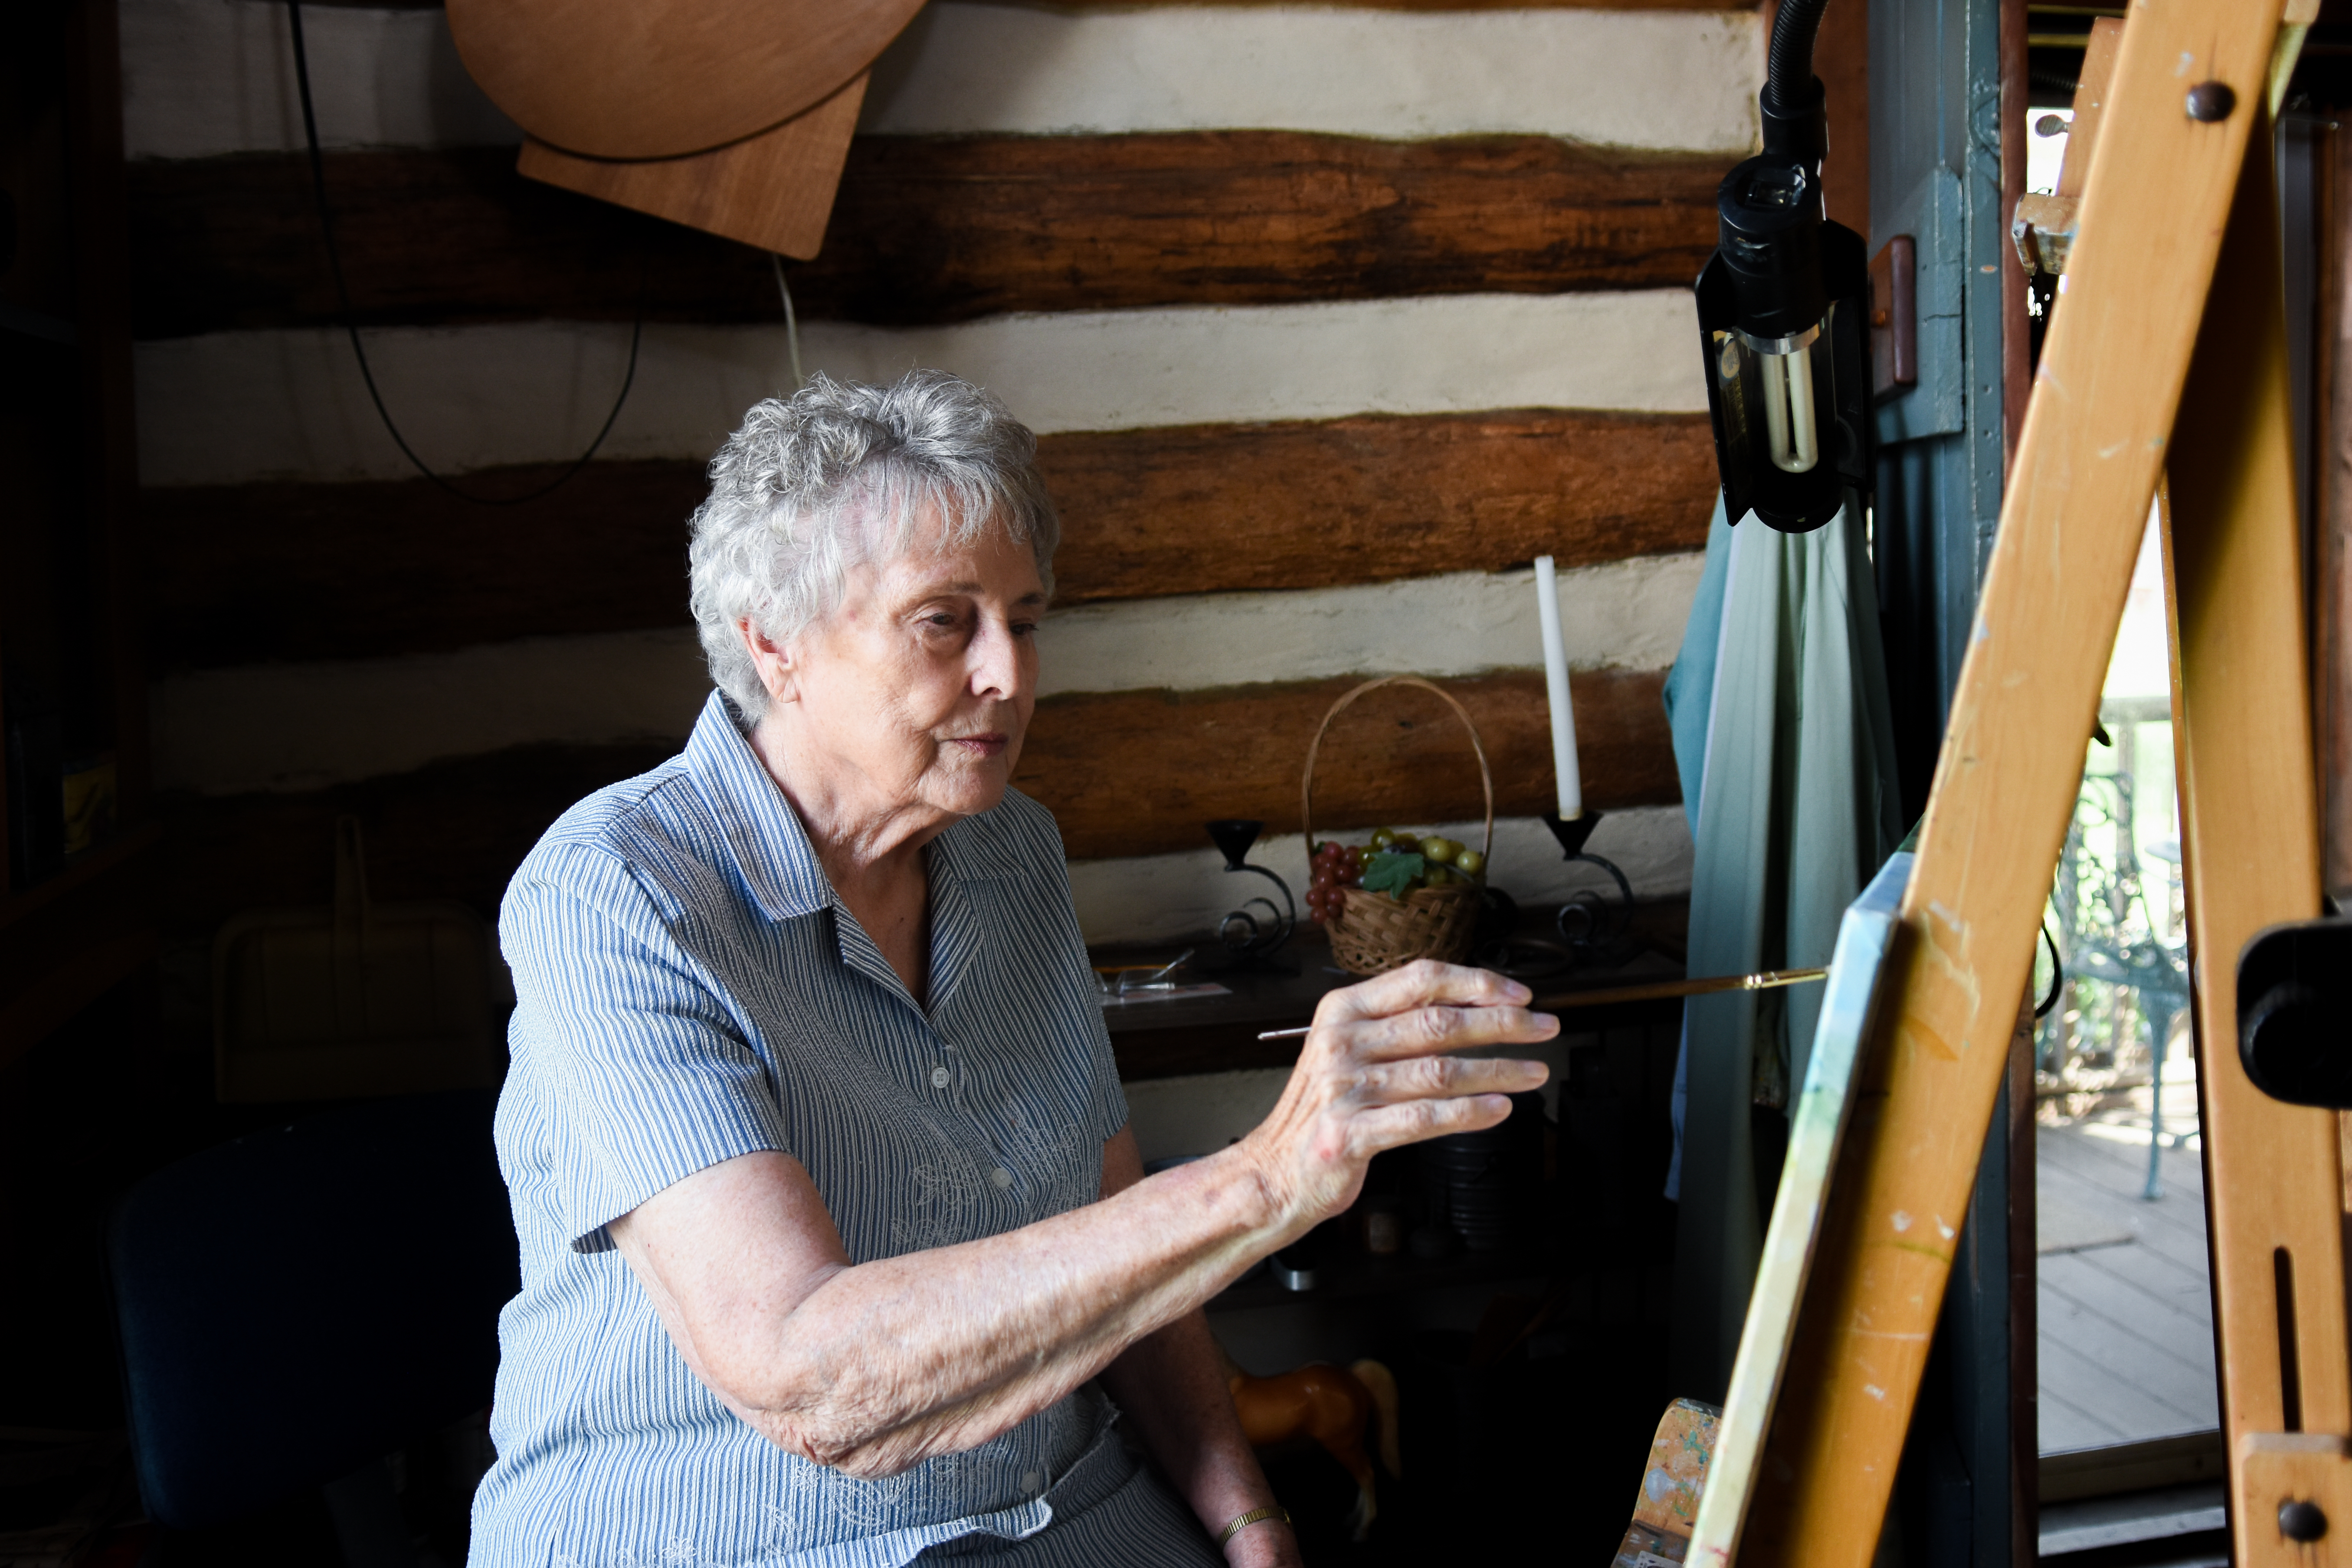 89-year-old artist, Billie Sue Kibbons, to be featured in Homecoming art exhibit